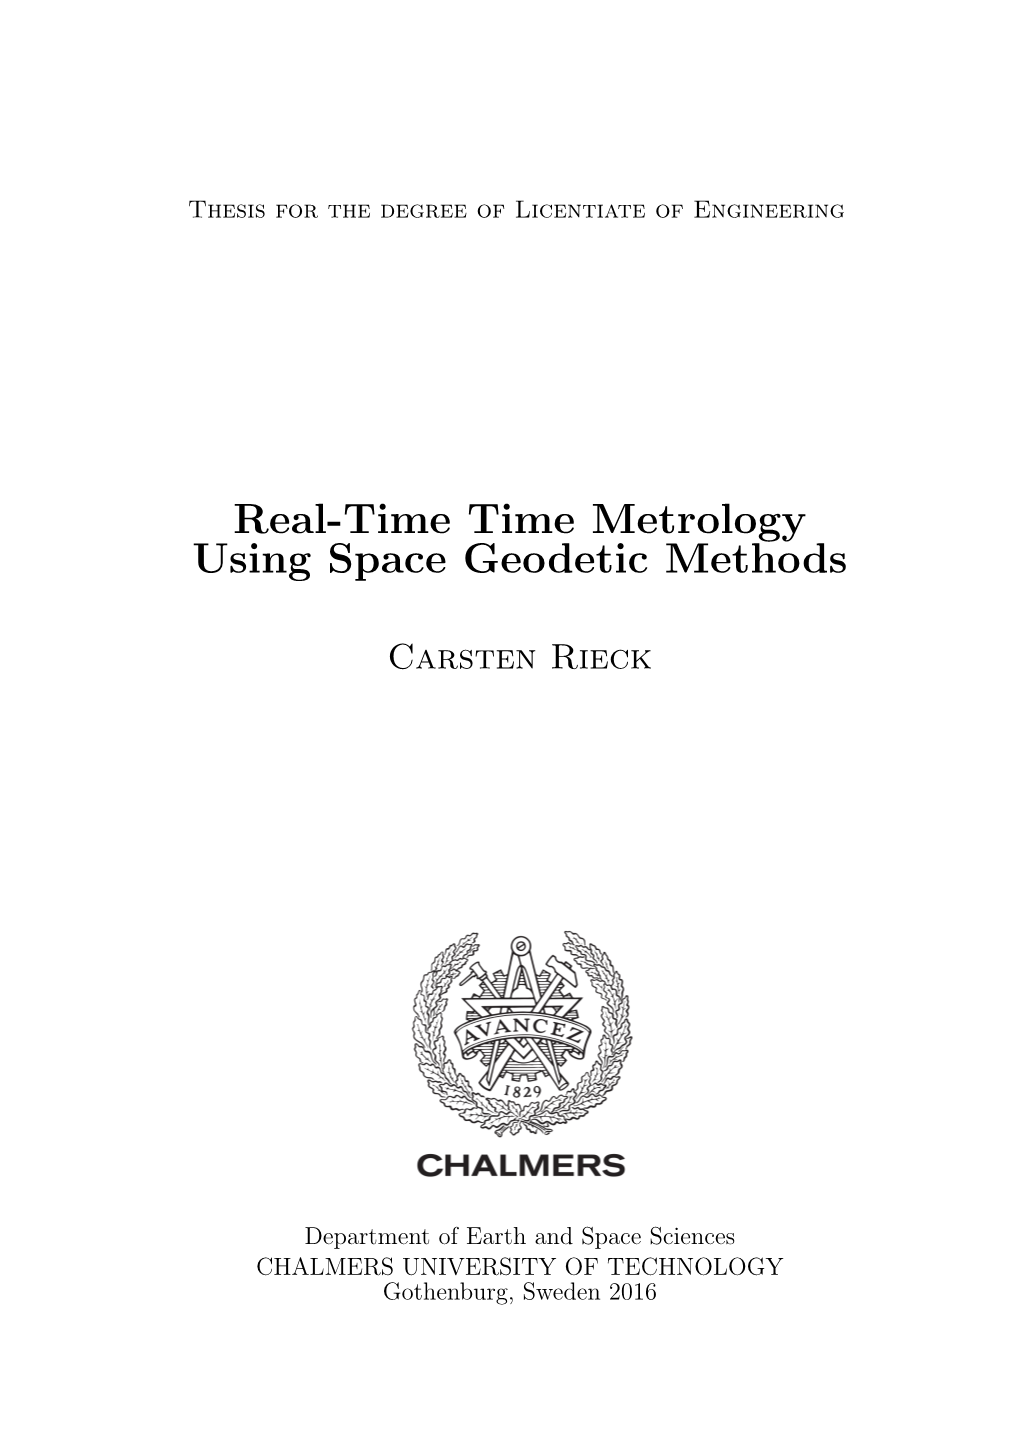 Real-Time Time Metrology Using Space Geodetic Methods